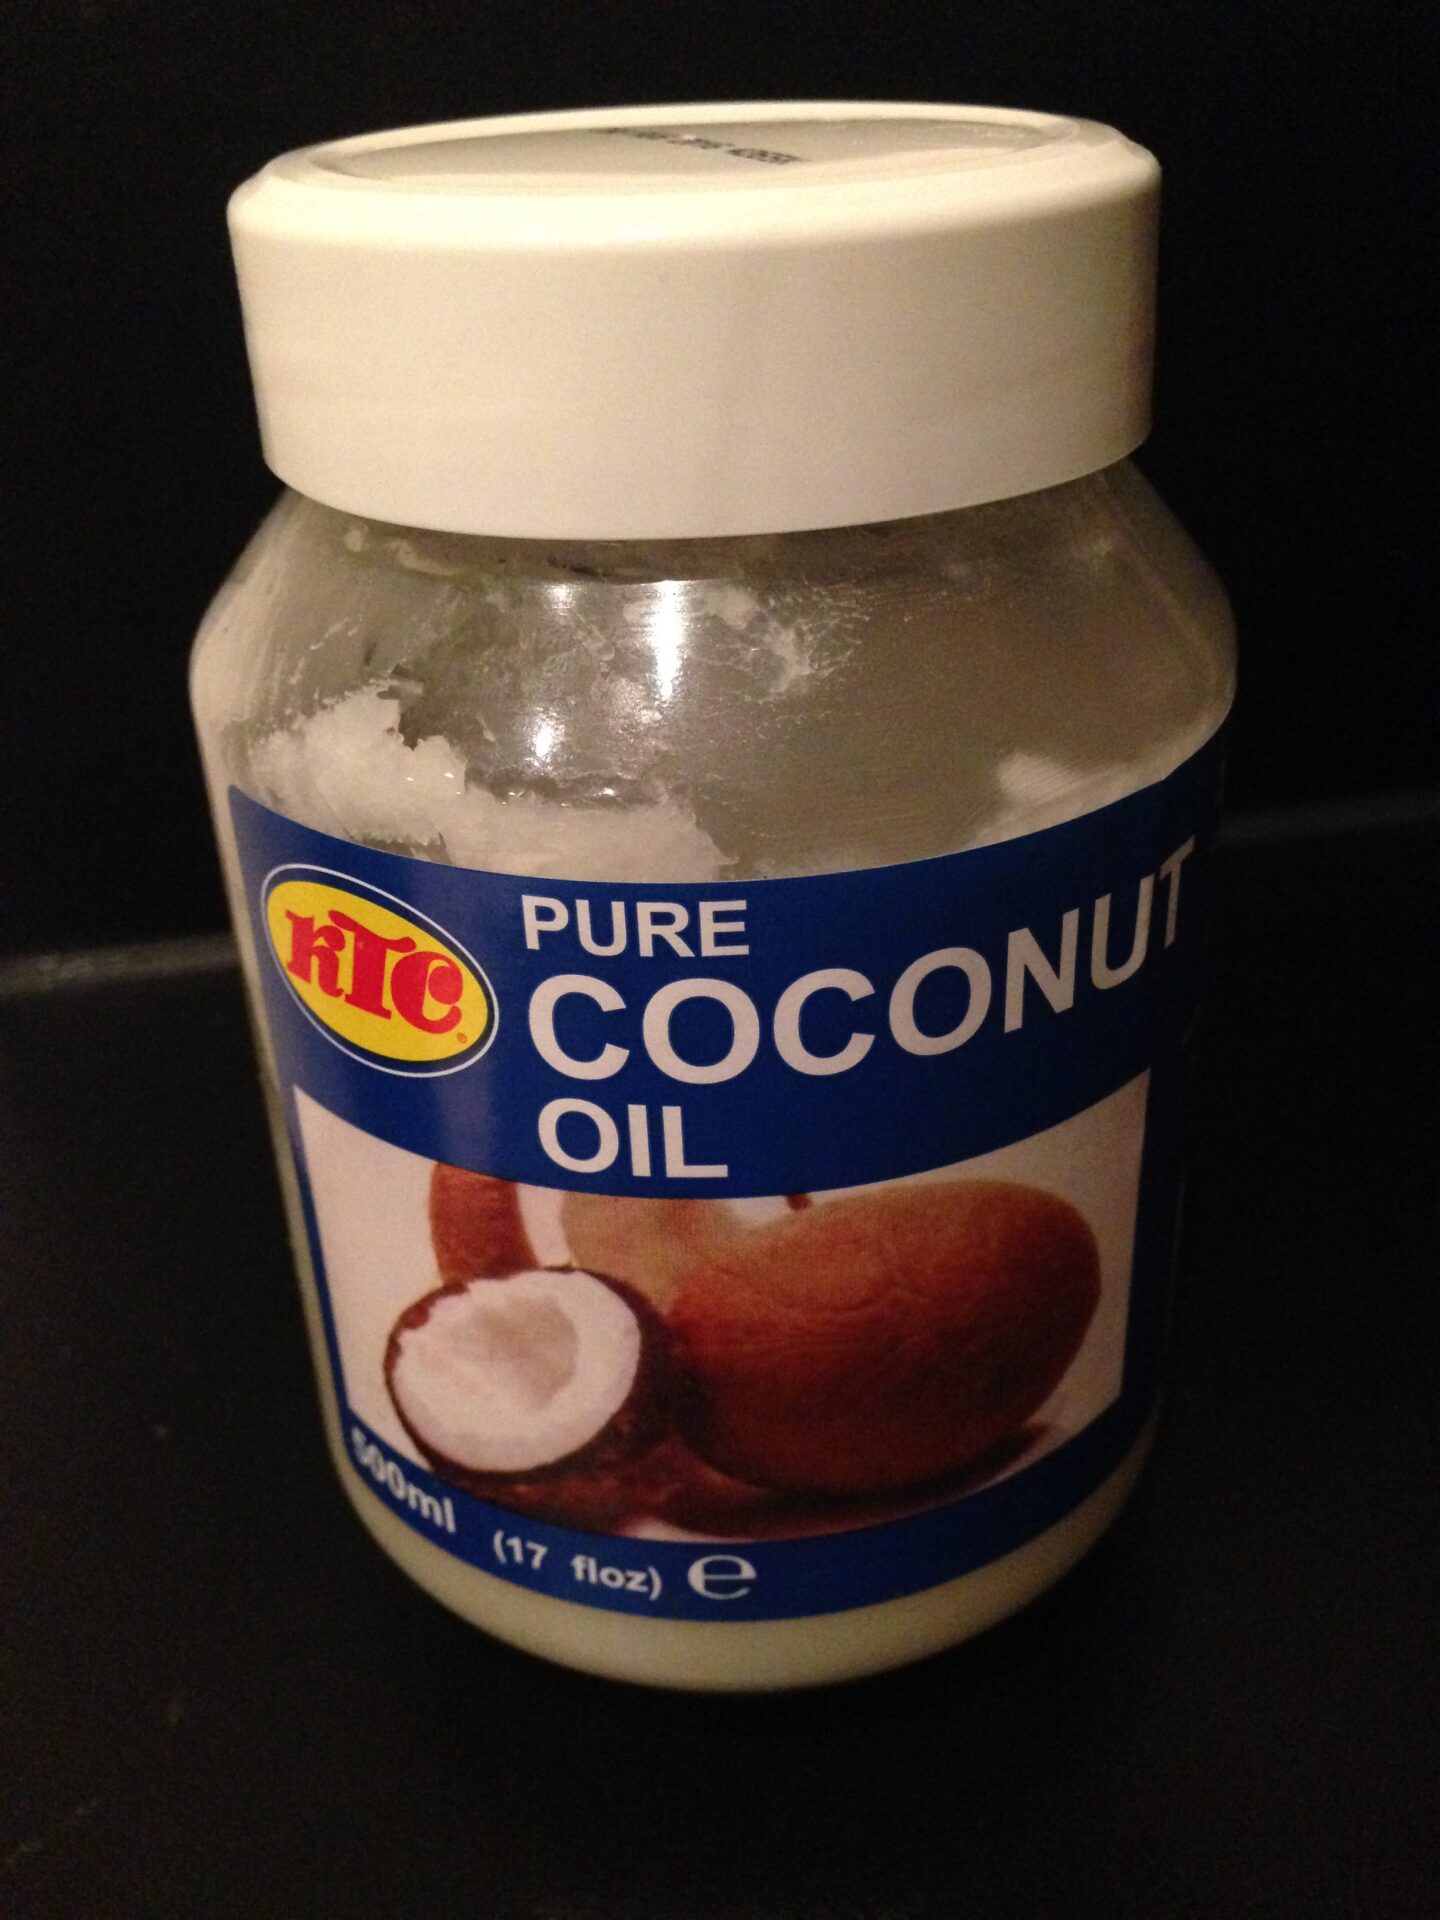 8 ways with coconut oil